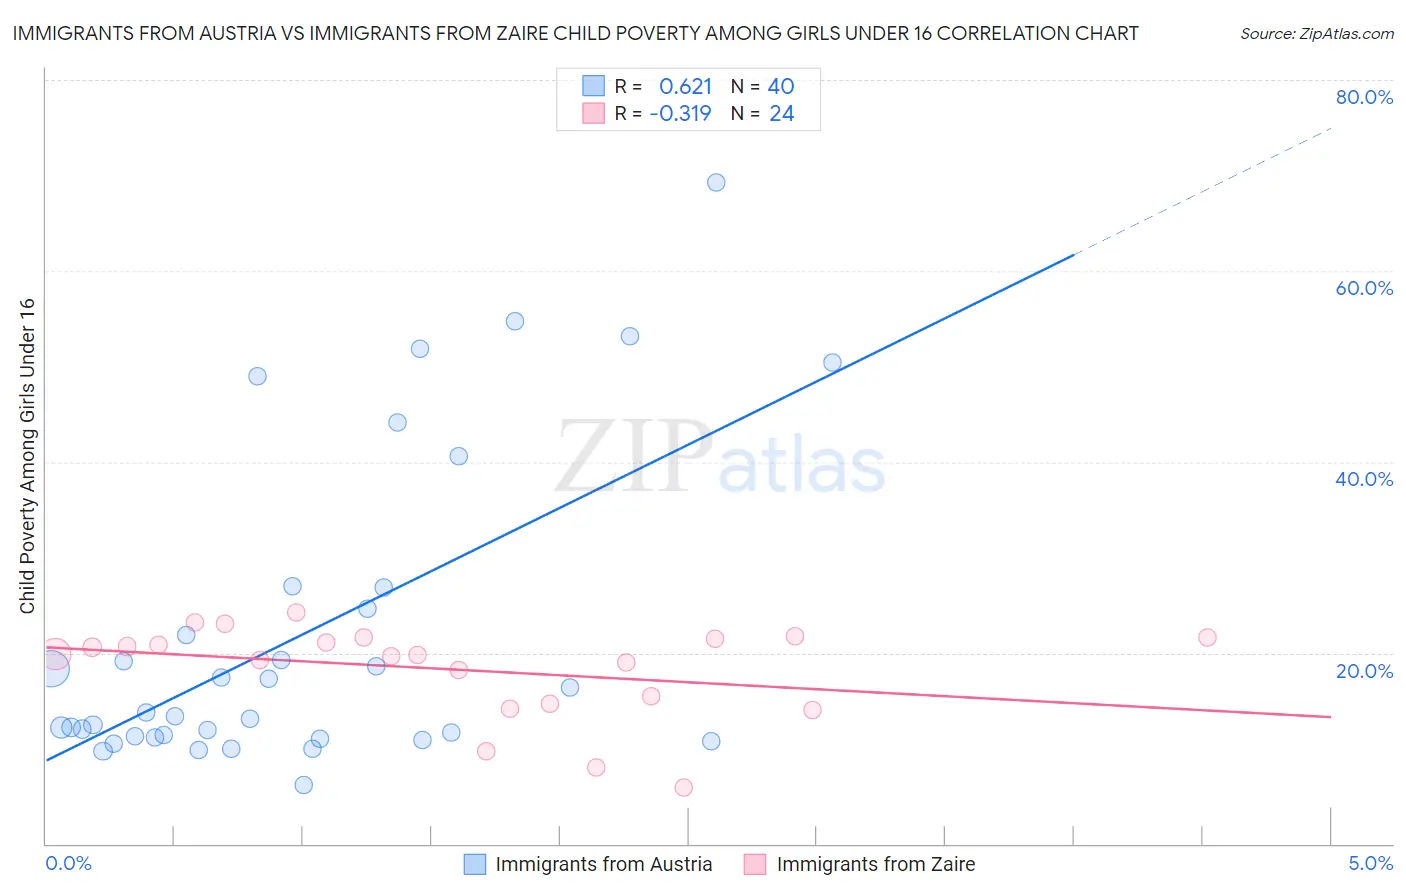 Immigrants from Austria vs Immigrants from Zaire Child Poverty Among Girls Under 16